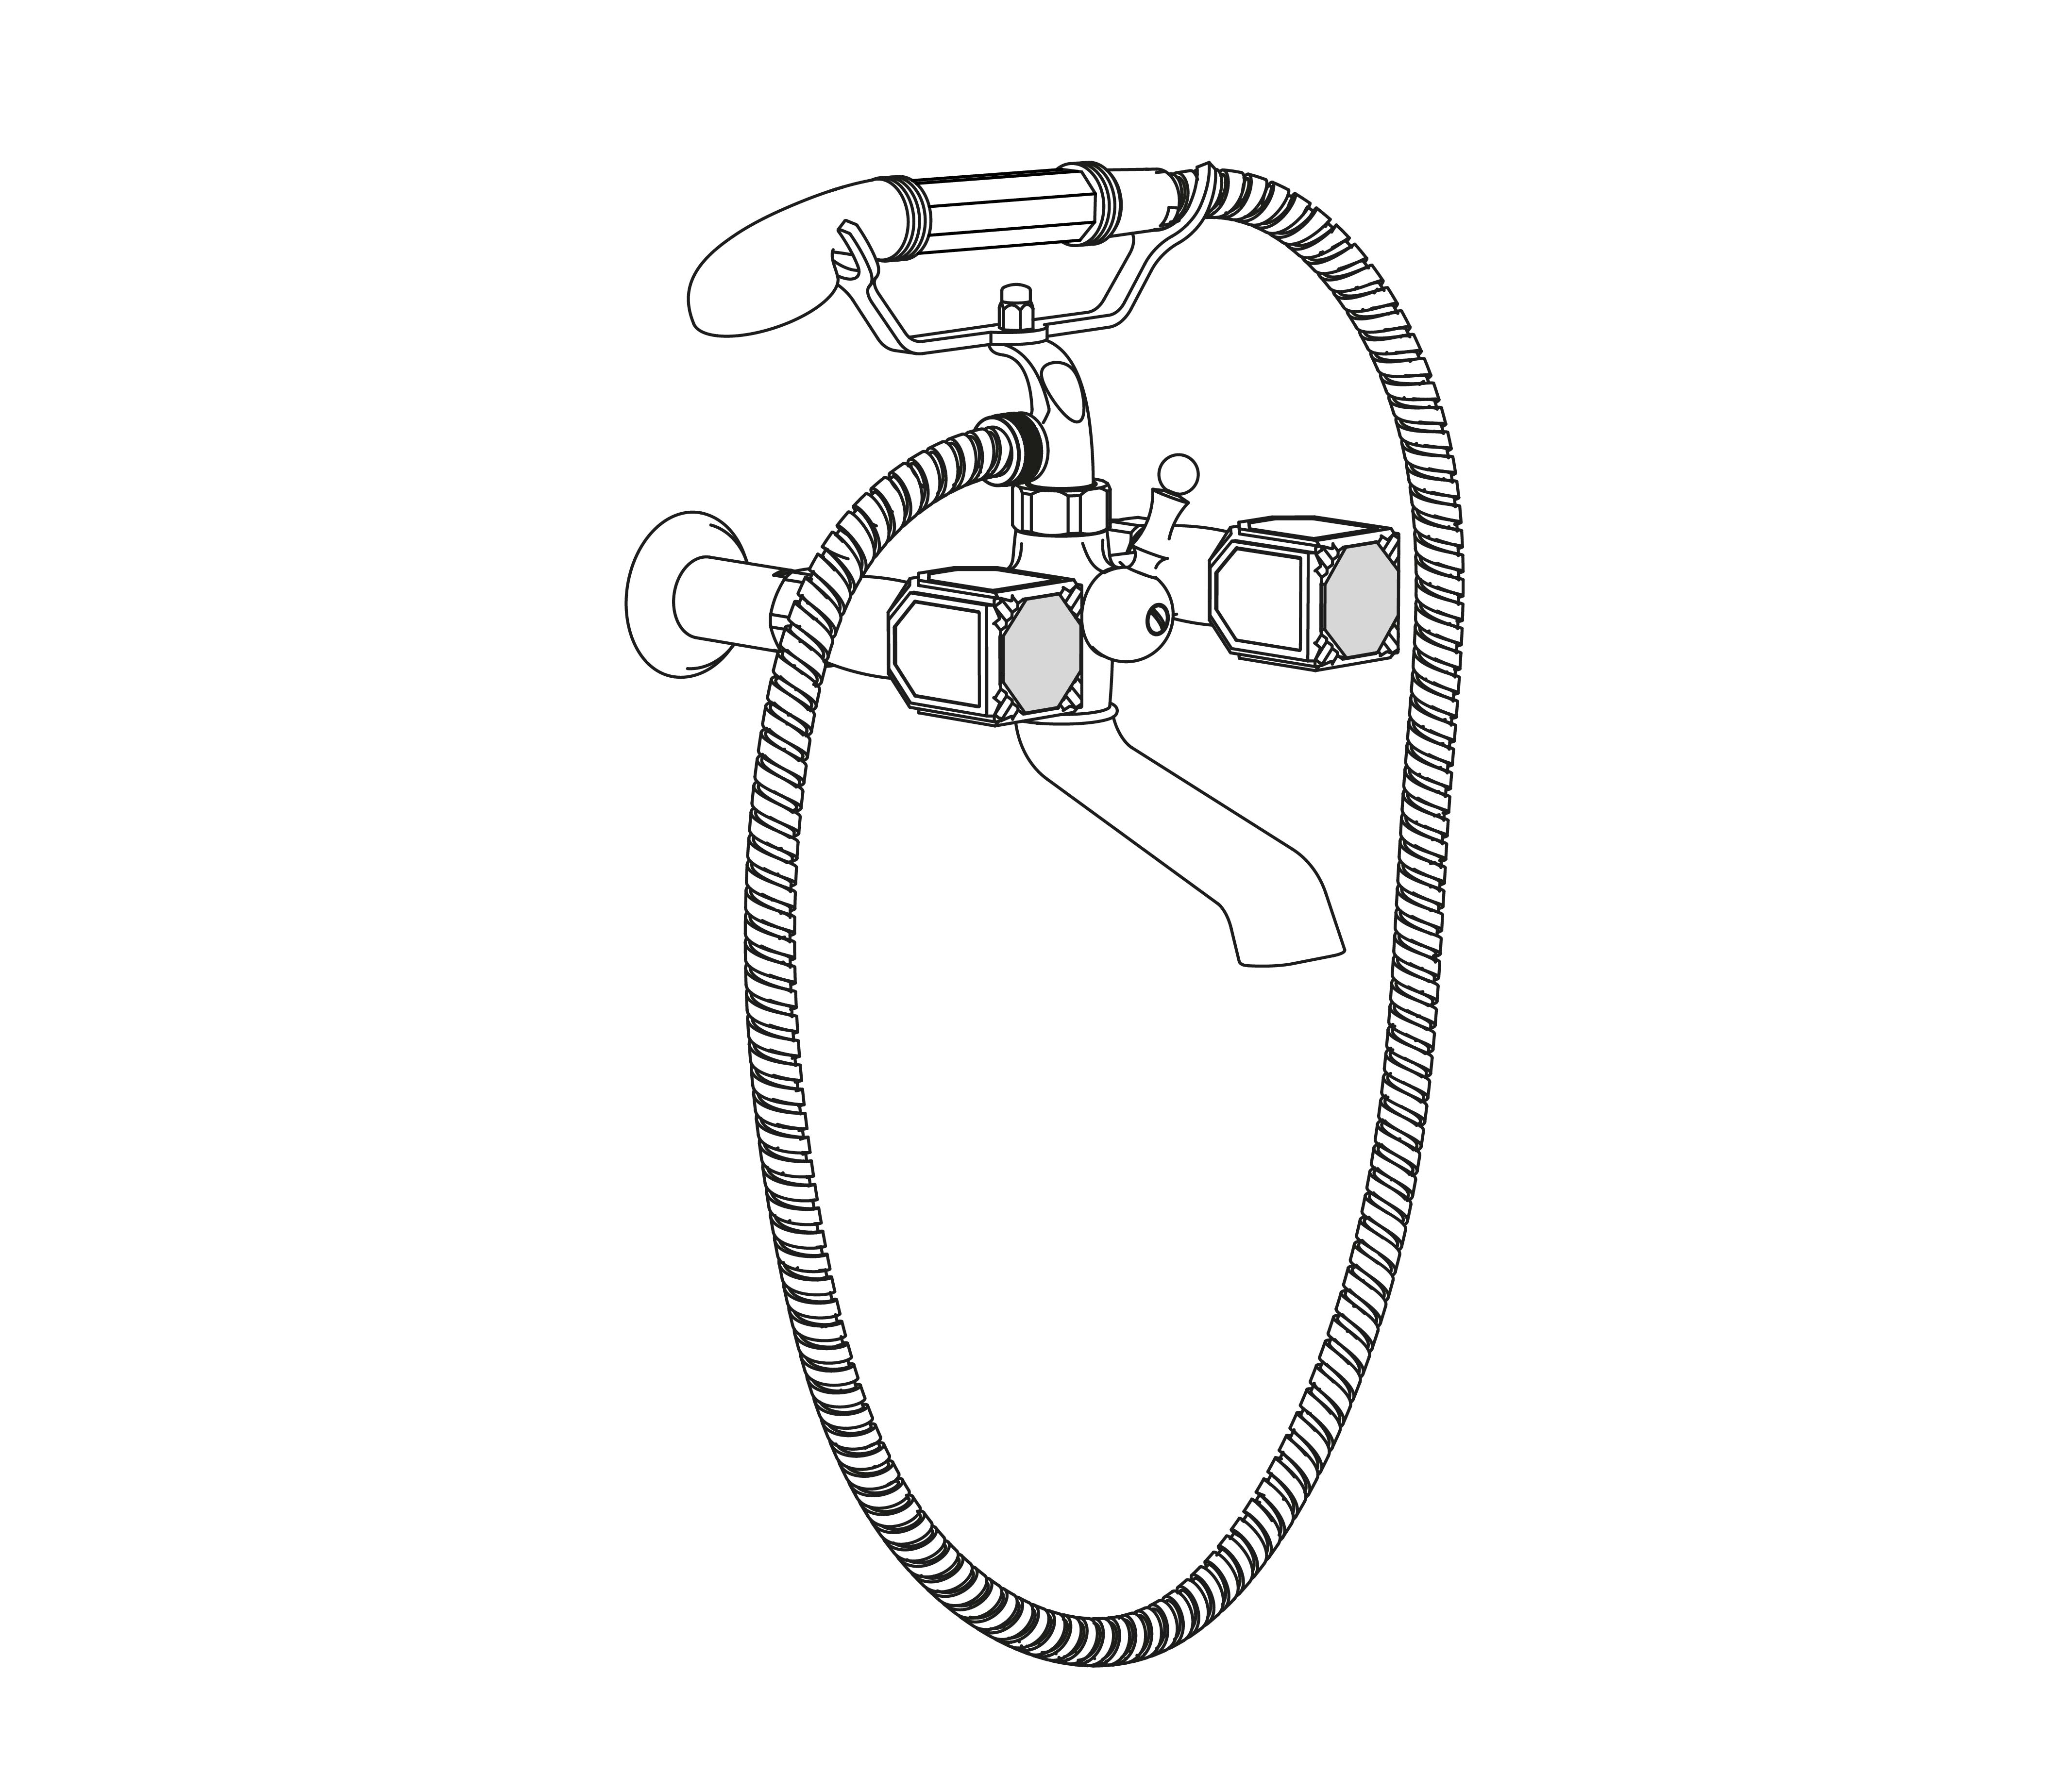 S58-3201 Wall mounted bath and shower mixer